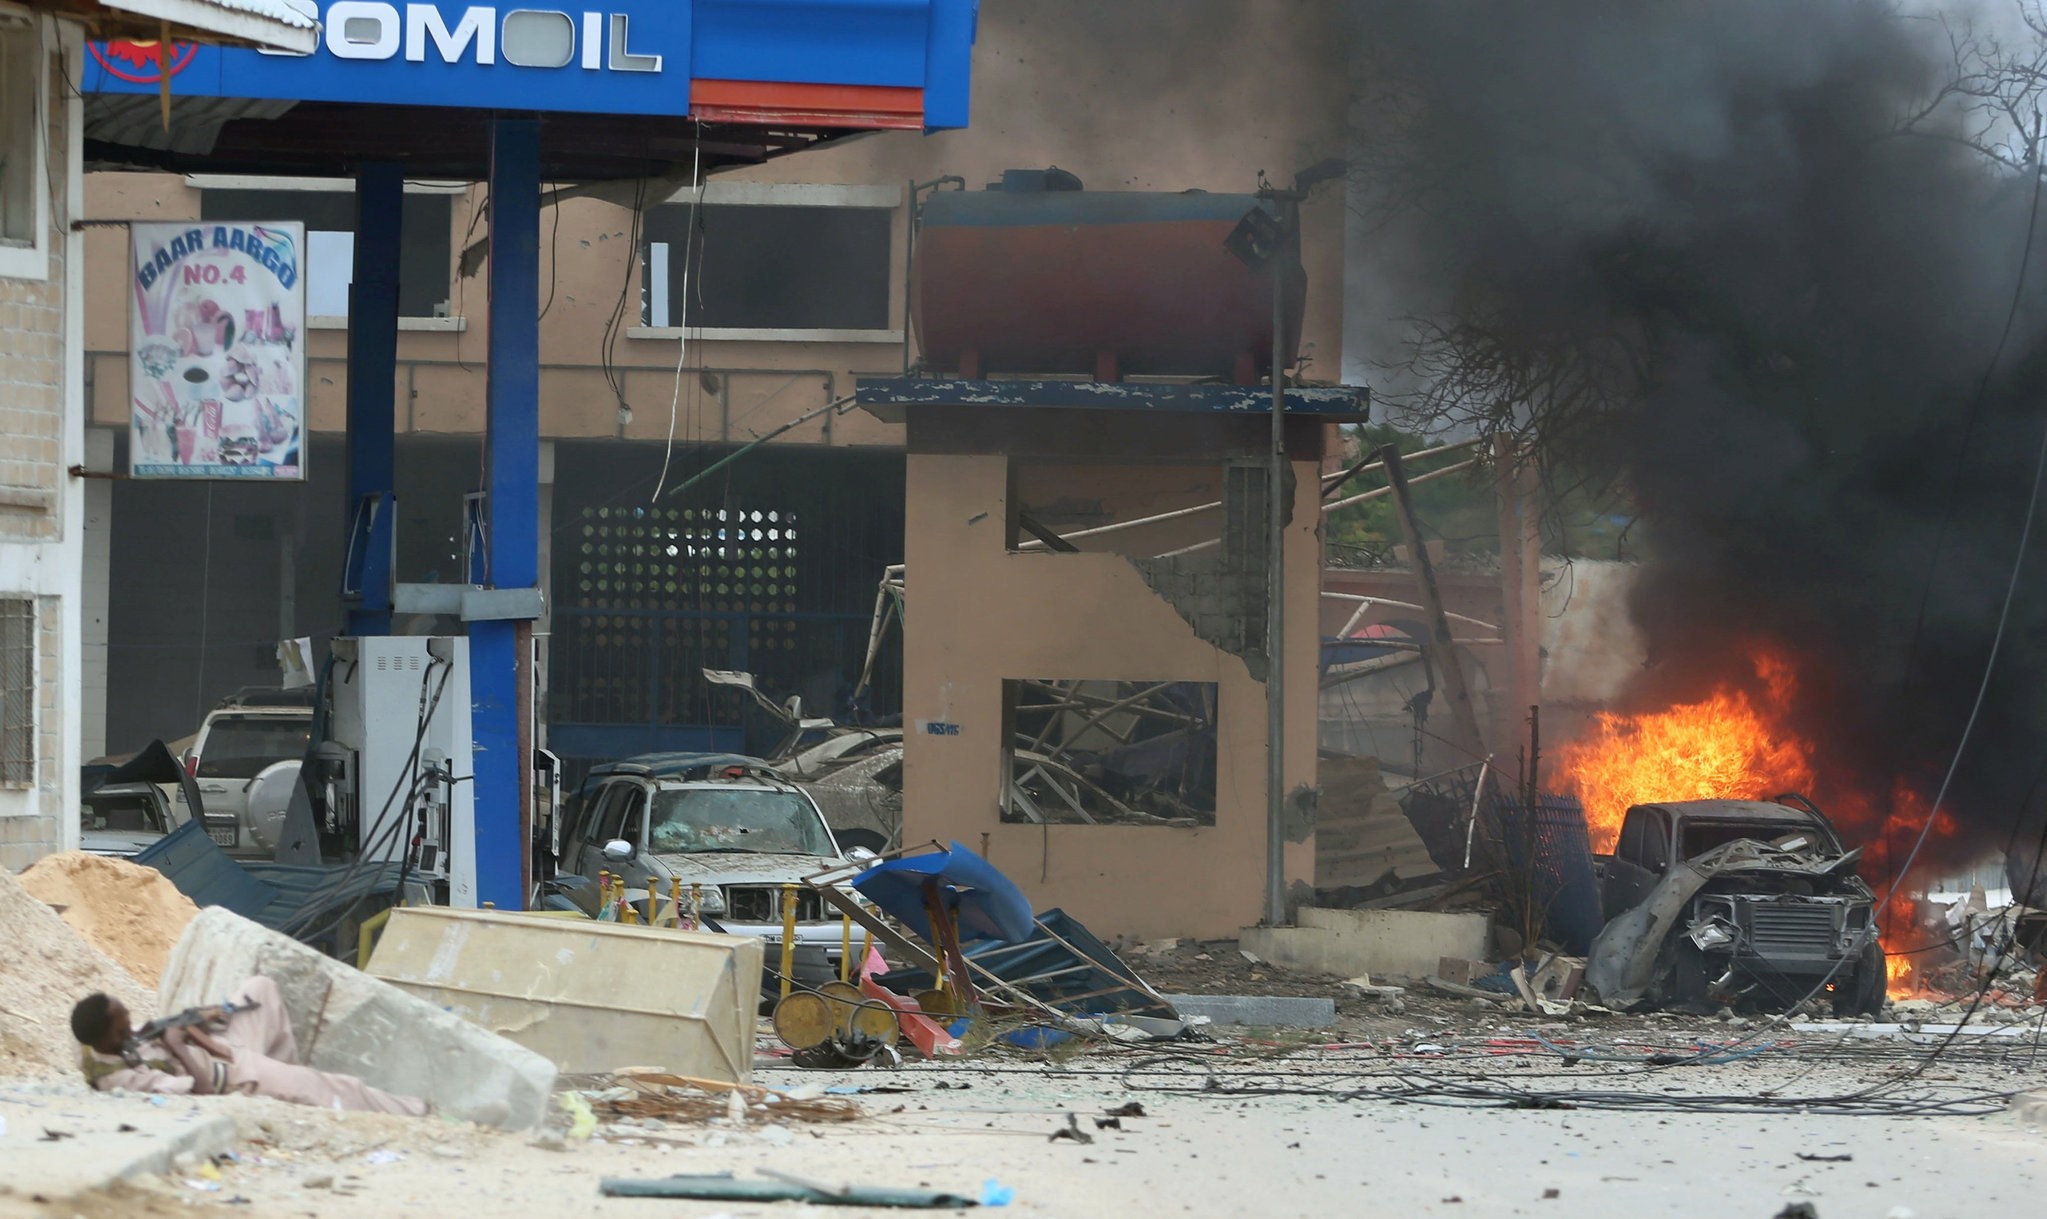  Somali government soldier holds his position during gunfire after a suicide bomb attack outside Nasahablood hotel in Somalia's capital Mogadishu, June 25, 2016. (REUTERS Photo)